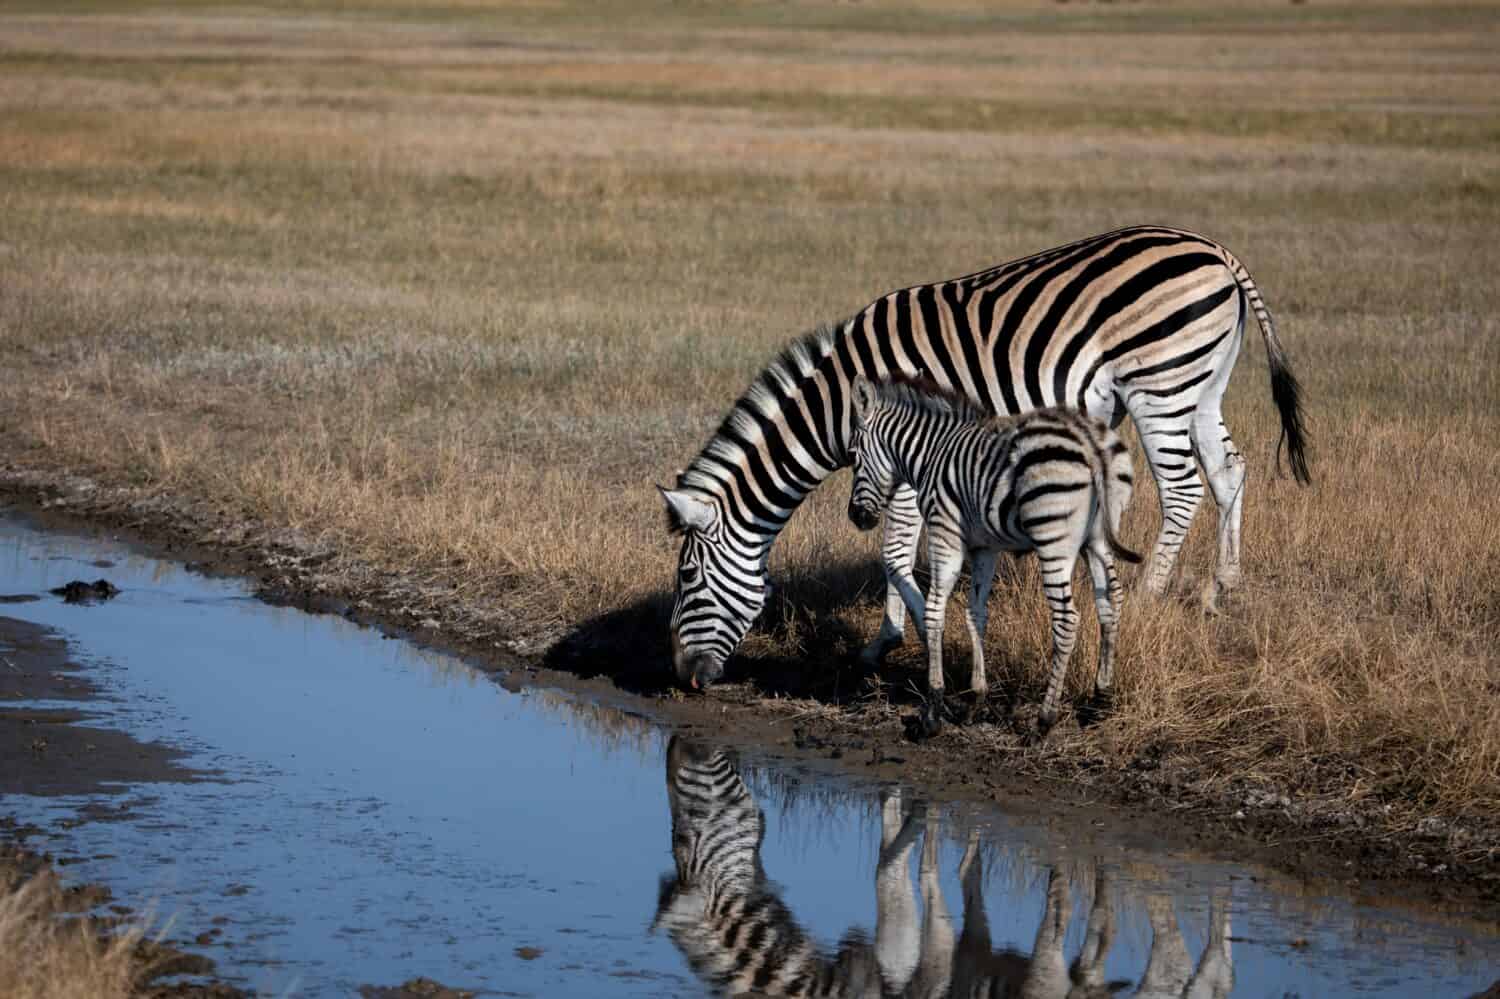 Mother zebra and baby zebra came to the watering hole and drink water